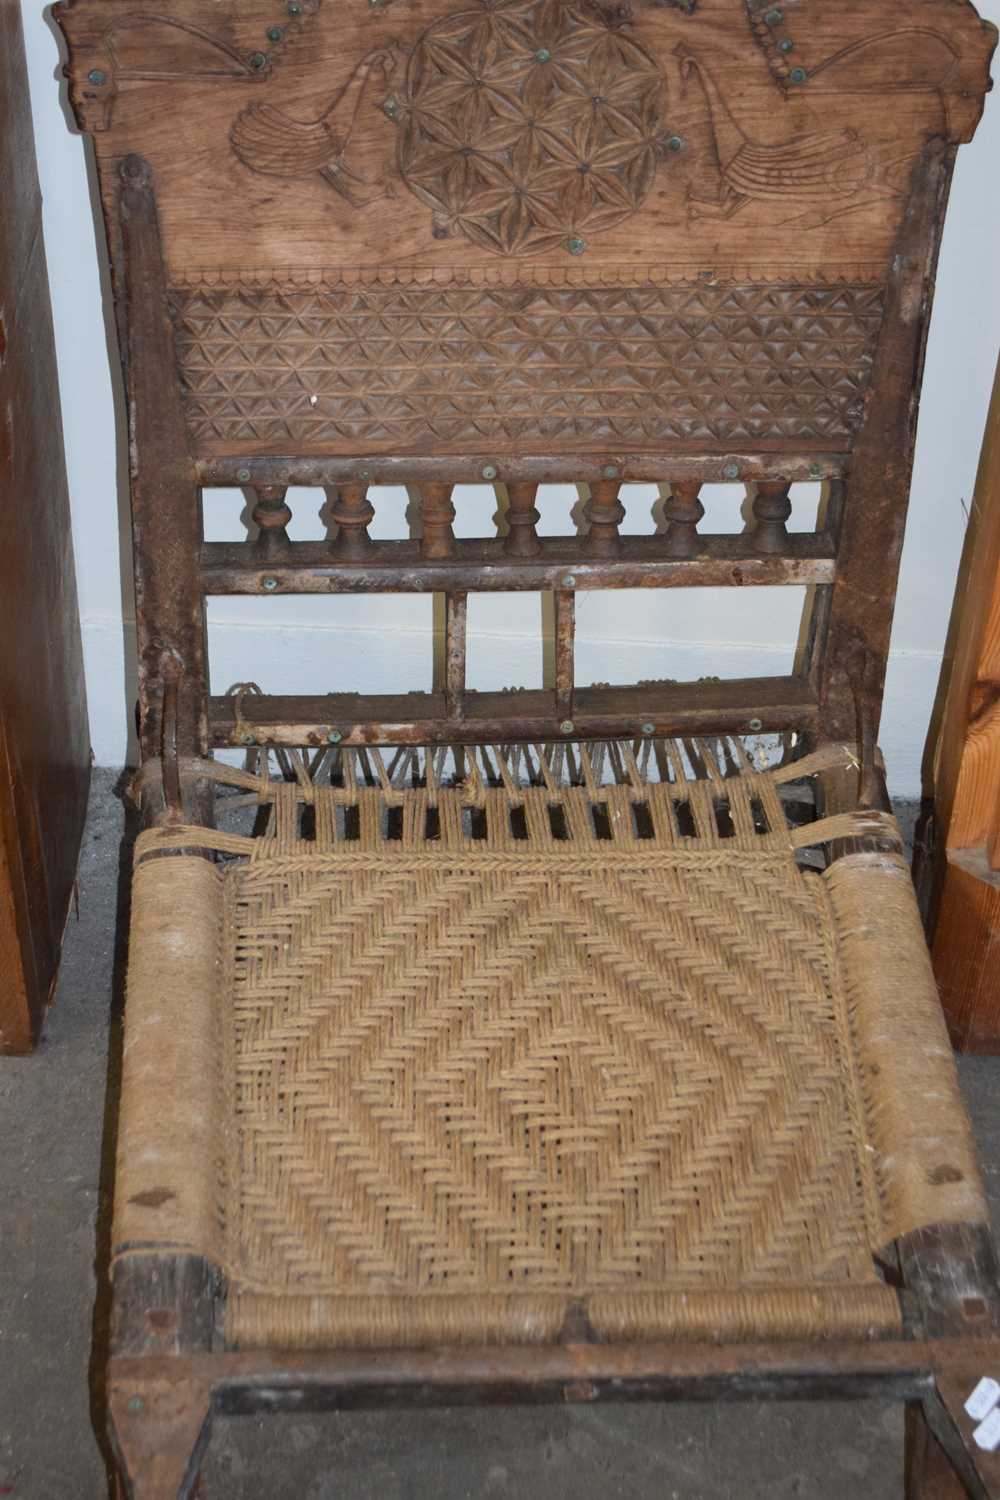 Indian hardwood chair with woven seat